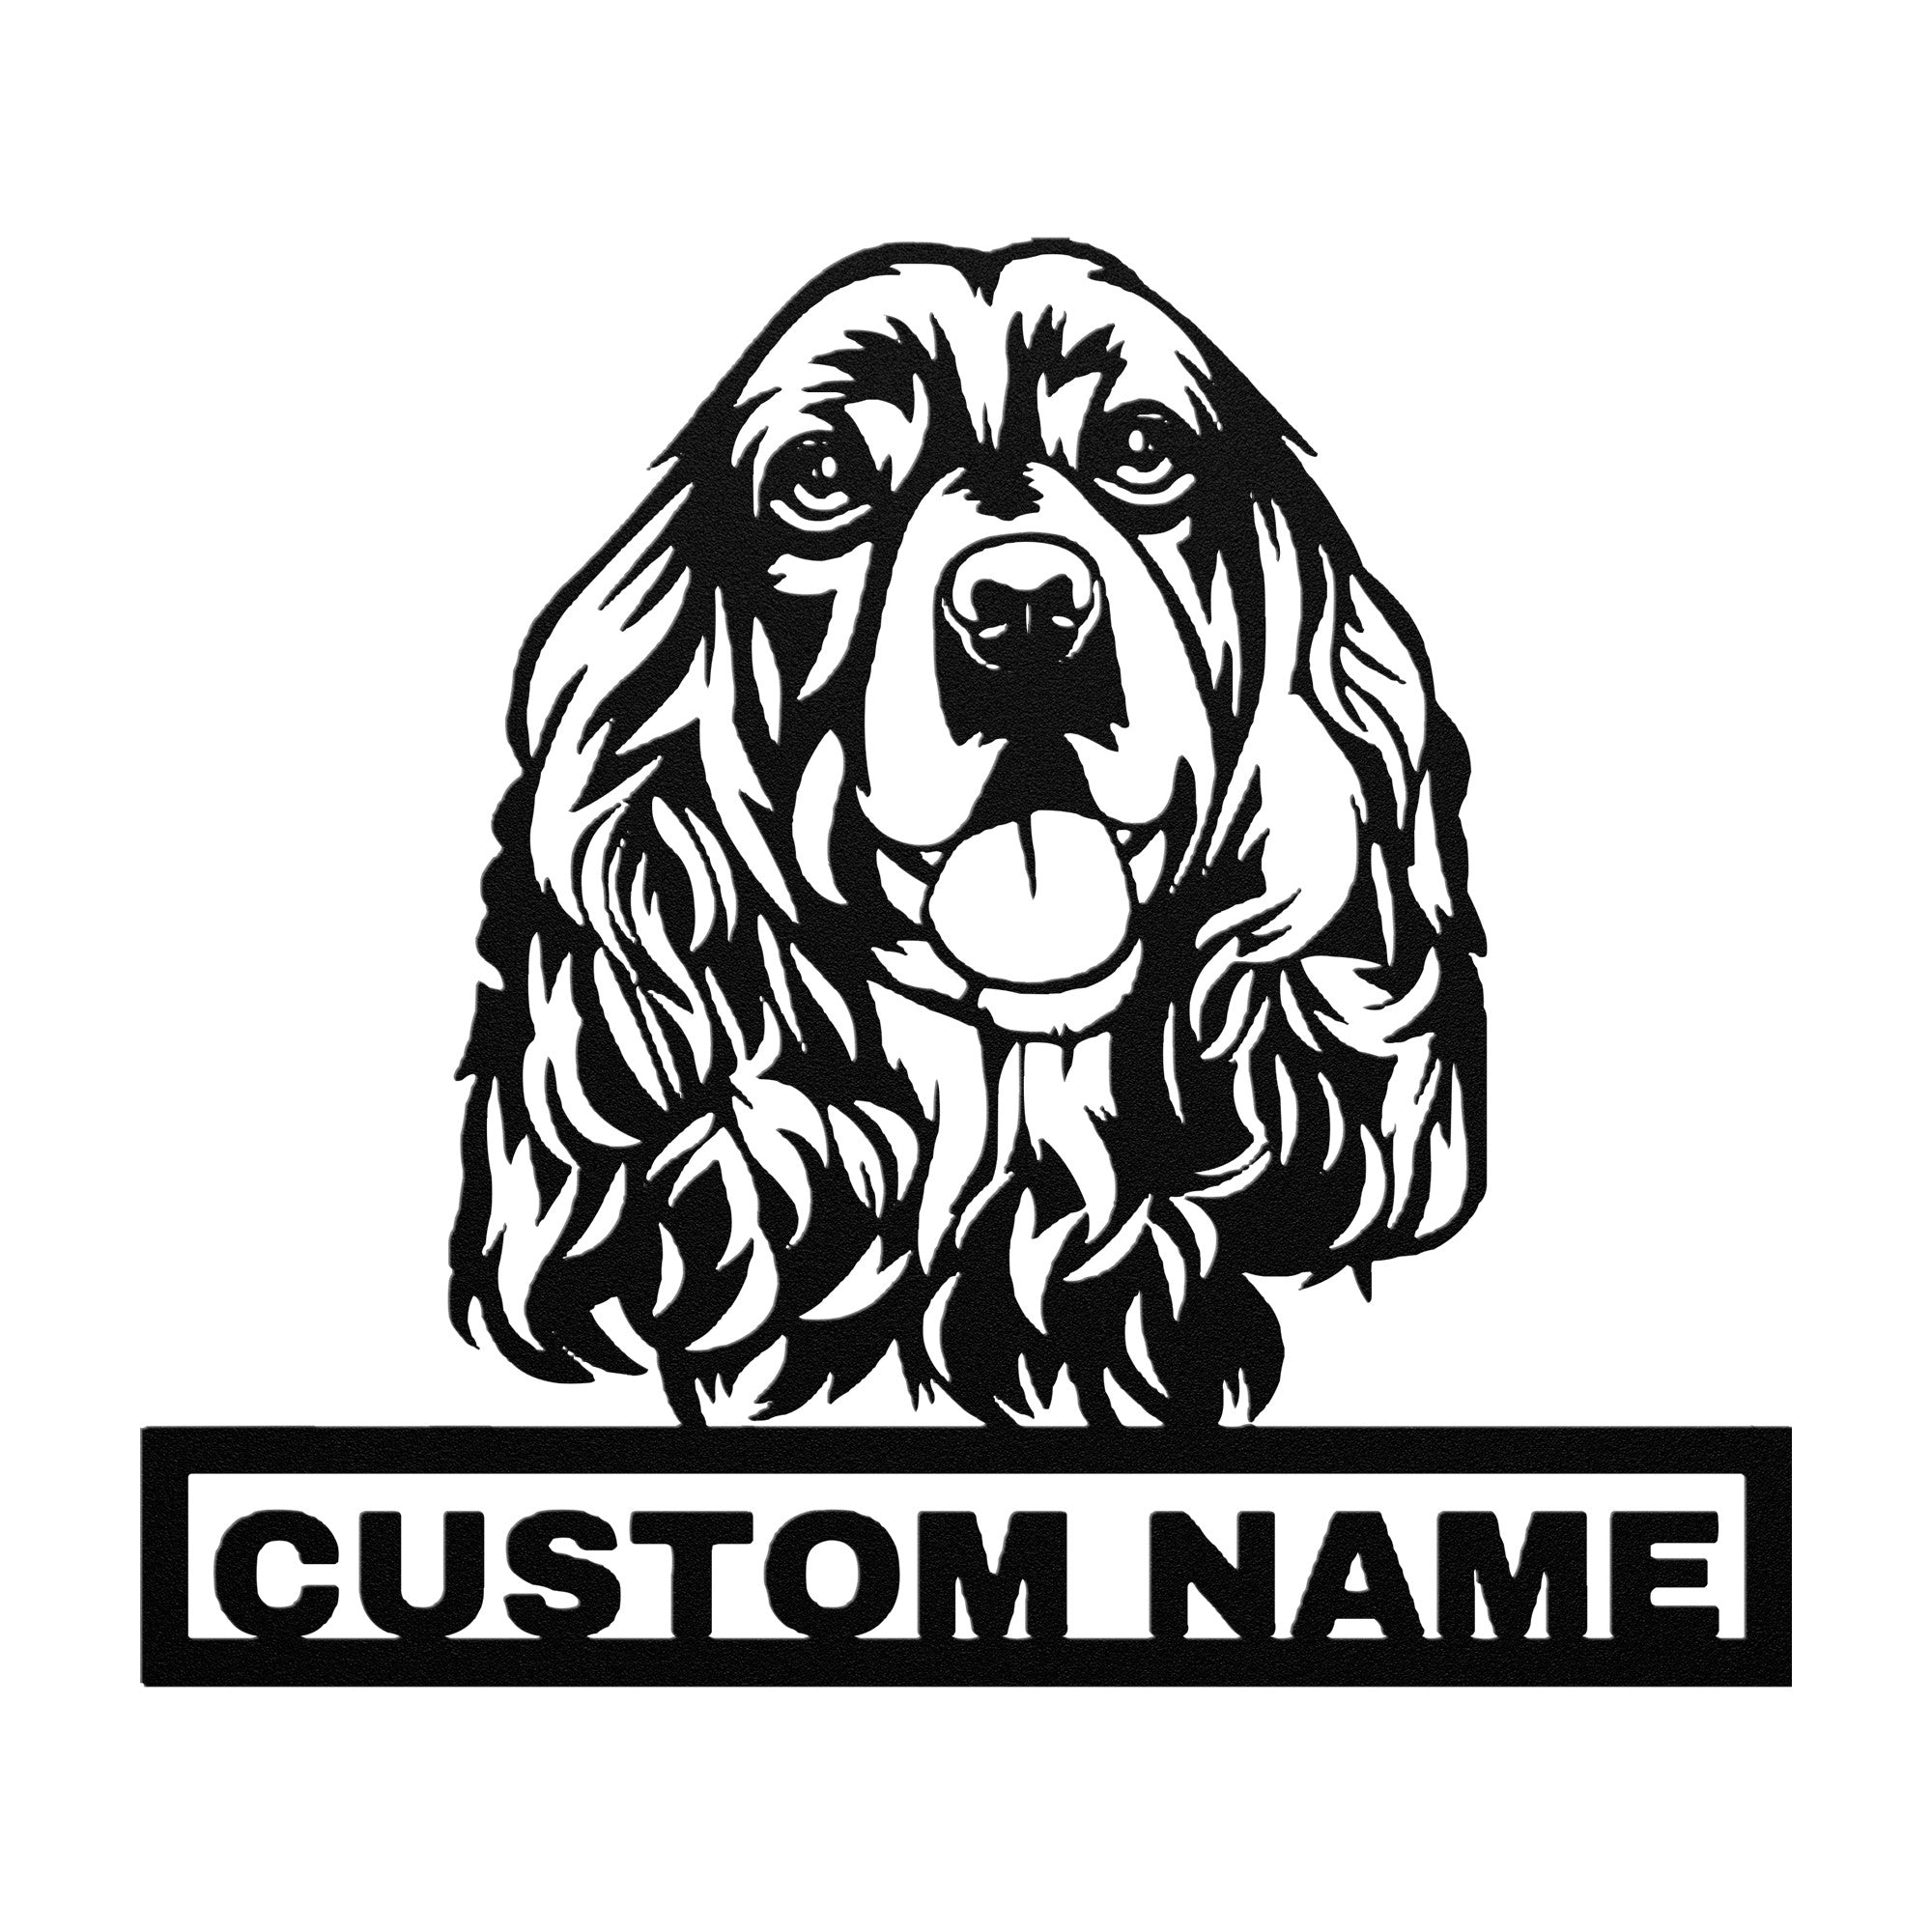 Personalized Cocker Spaniel Dog Metal Sign - Cocker Spaniel Custom Name Wall Decor, Metal Signs Customized Outdoor Indoor, Wall Art Gift For Cocker Spaniel Dog Lover